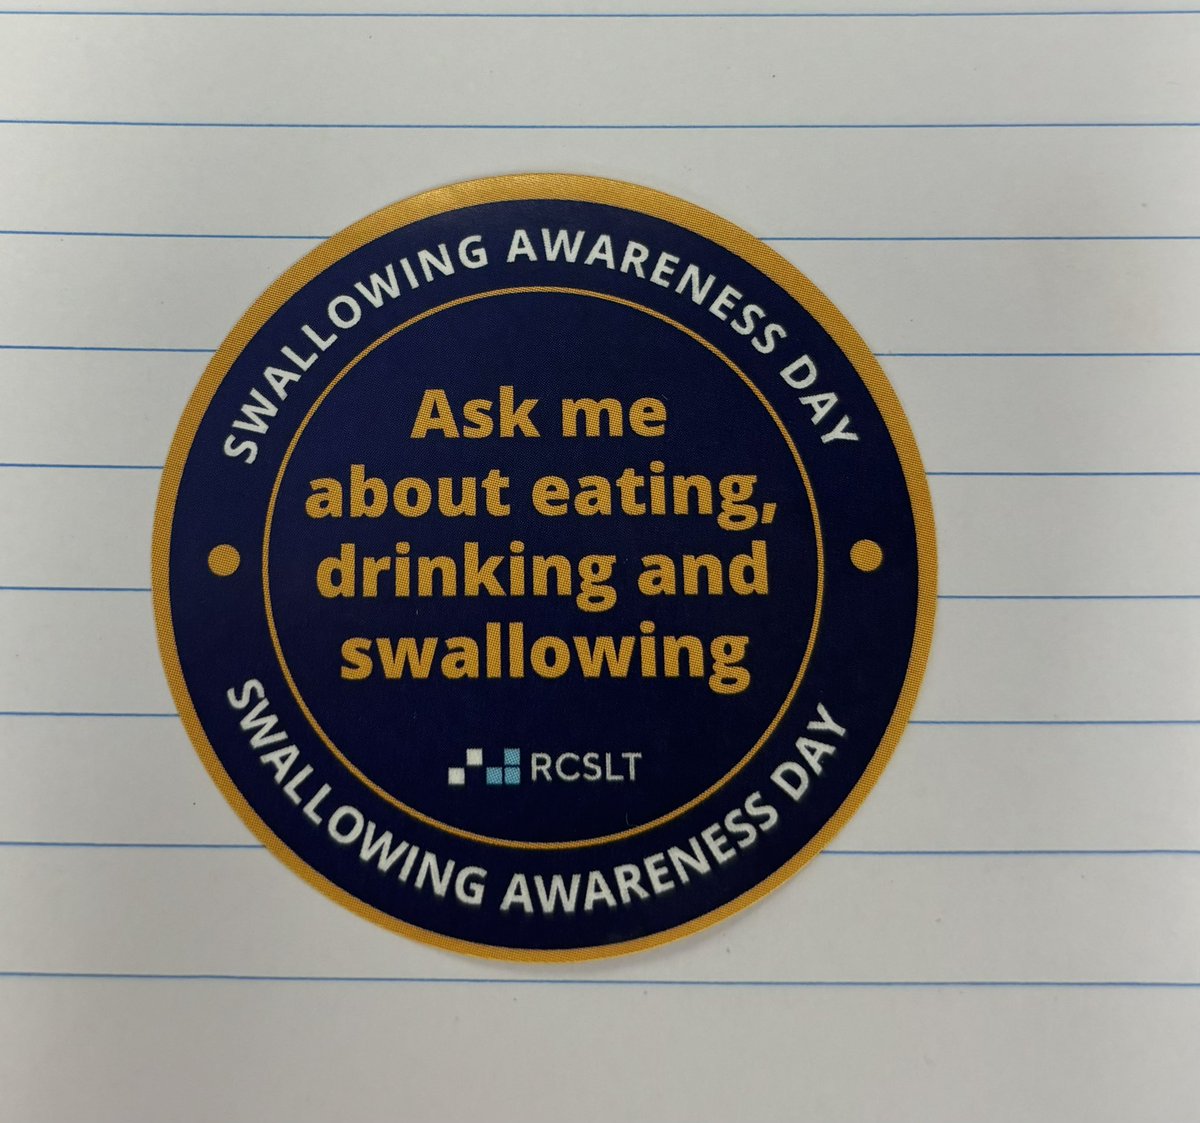 Its swallowing awareness day! Join us to highlight the difficulties people may face with eating, drinking and swallowing #SwallowAware2024